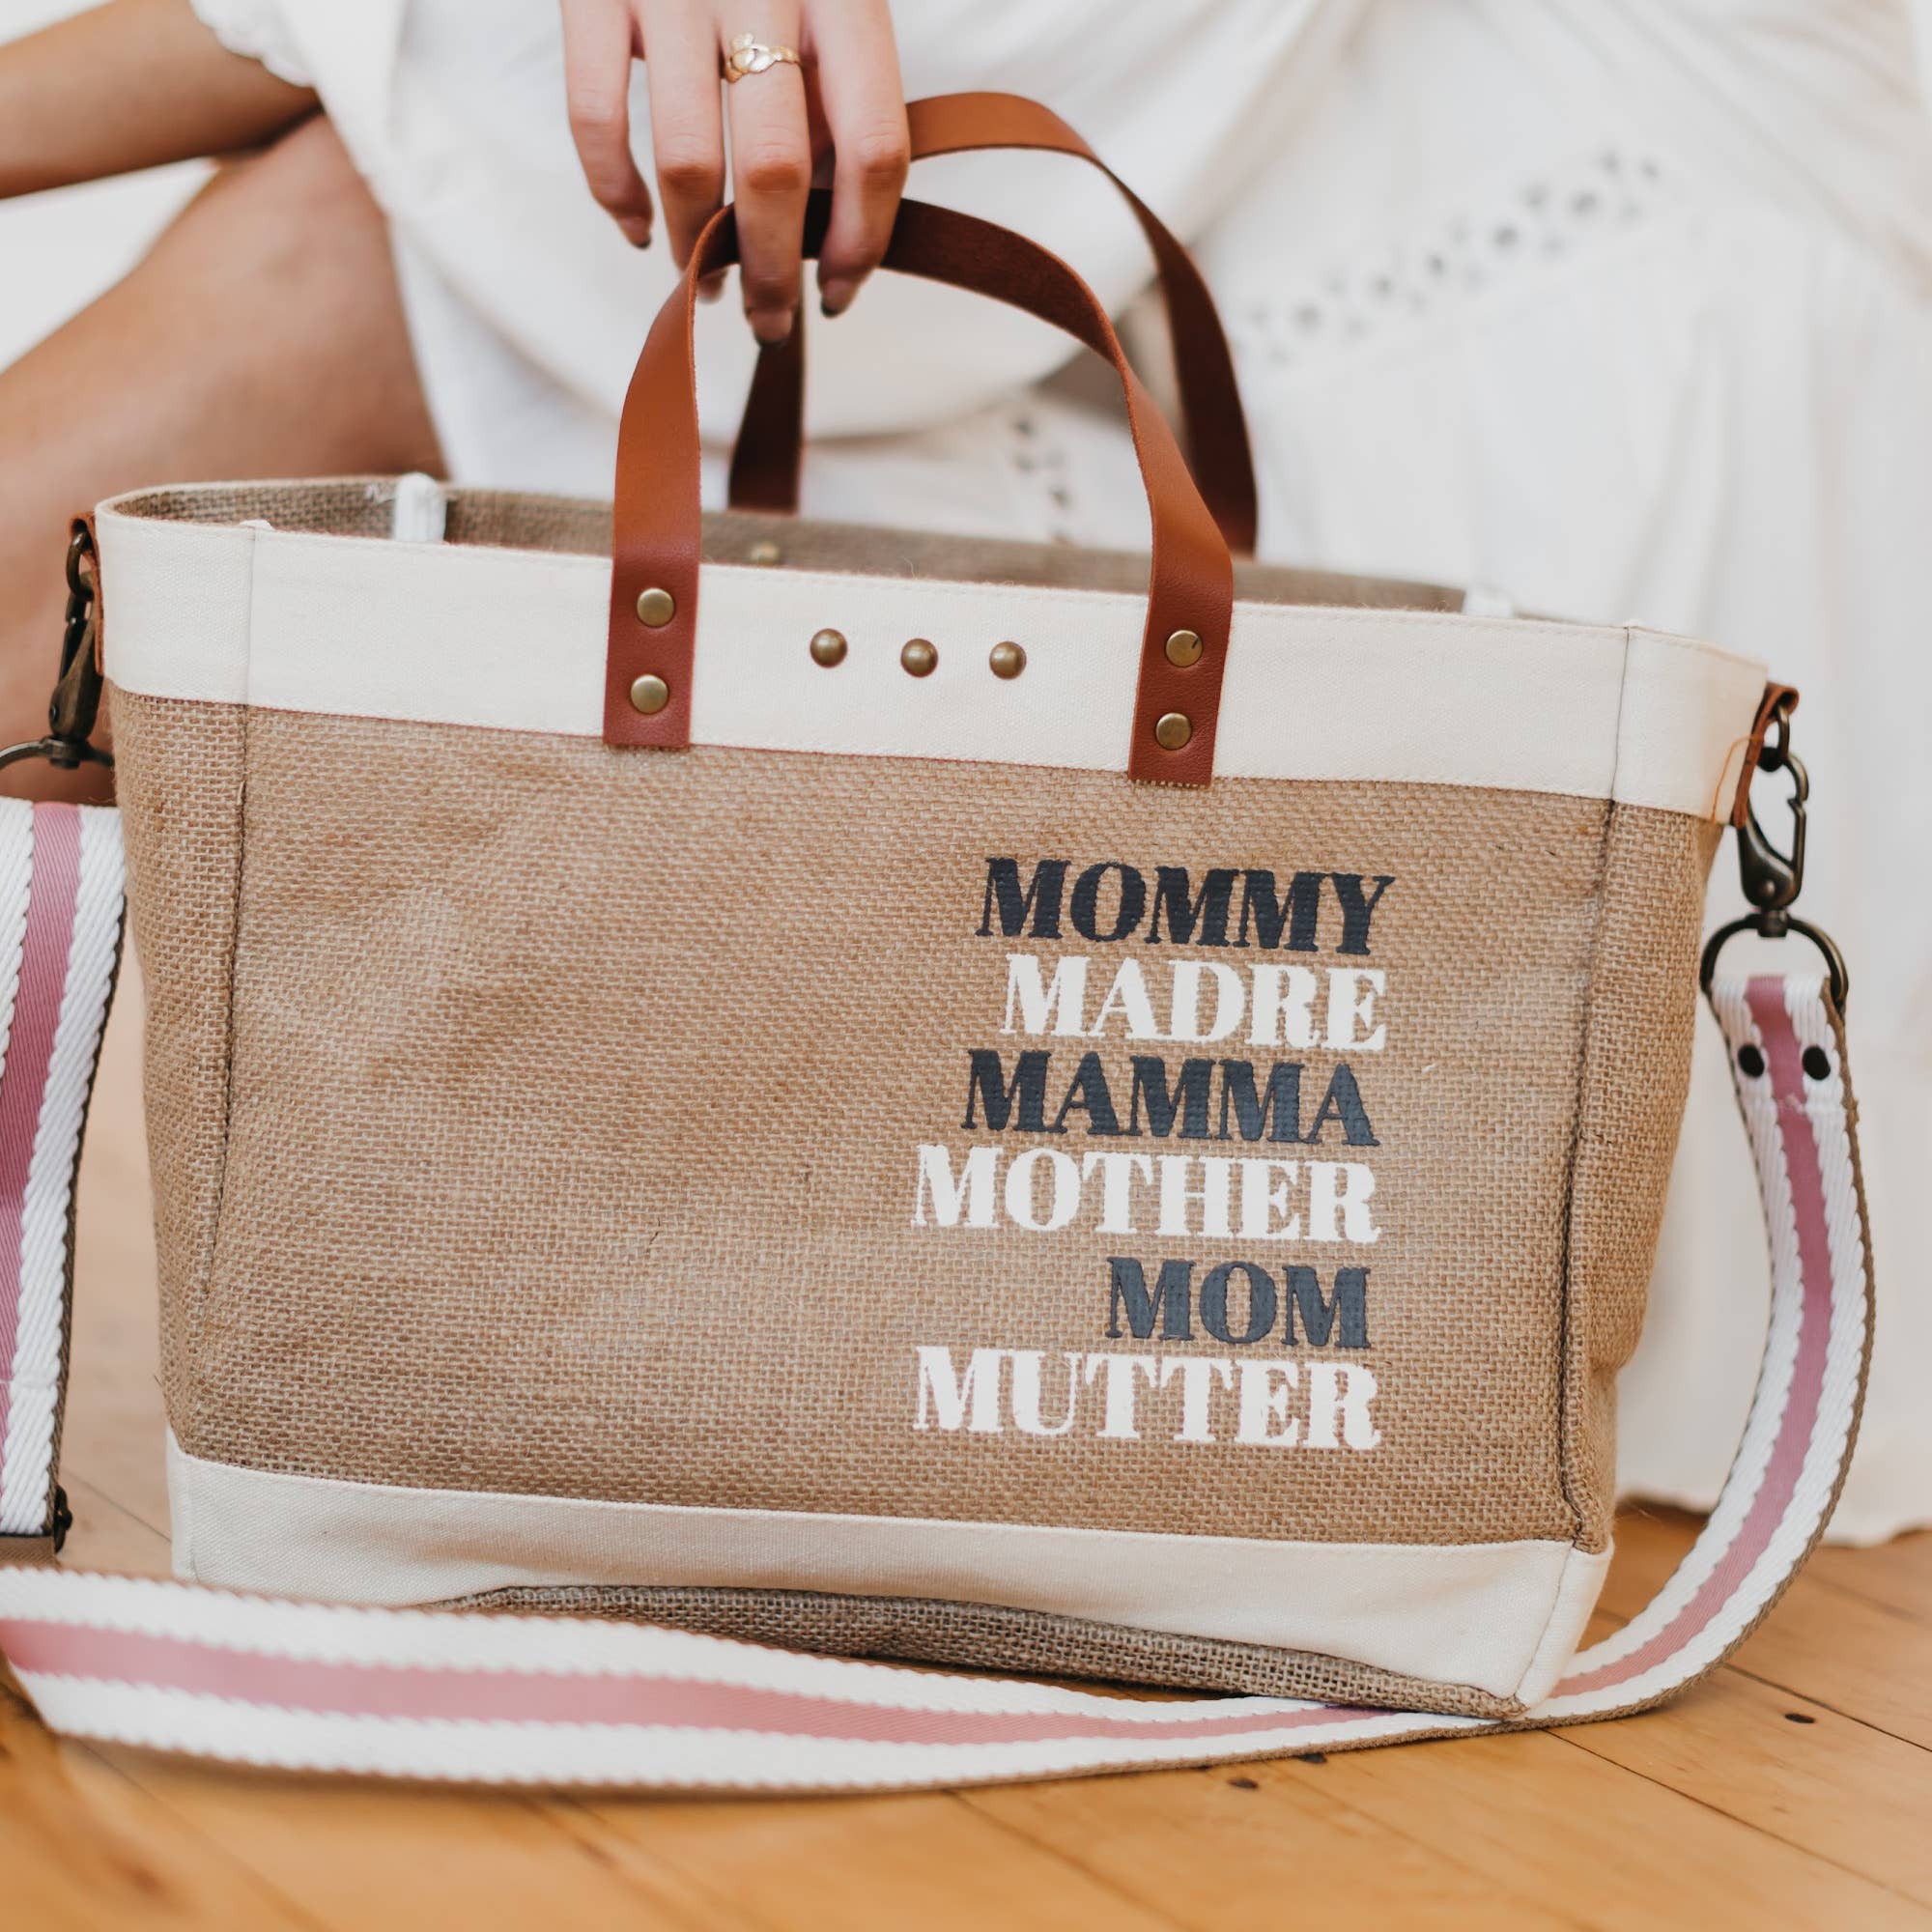 18 Stylish Bags For Moms With Toddlers - Paint The World With You